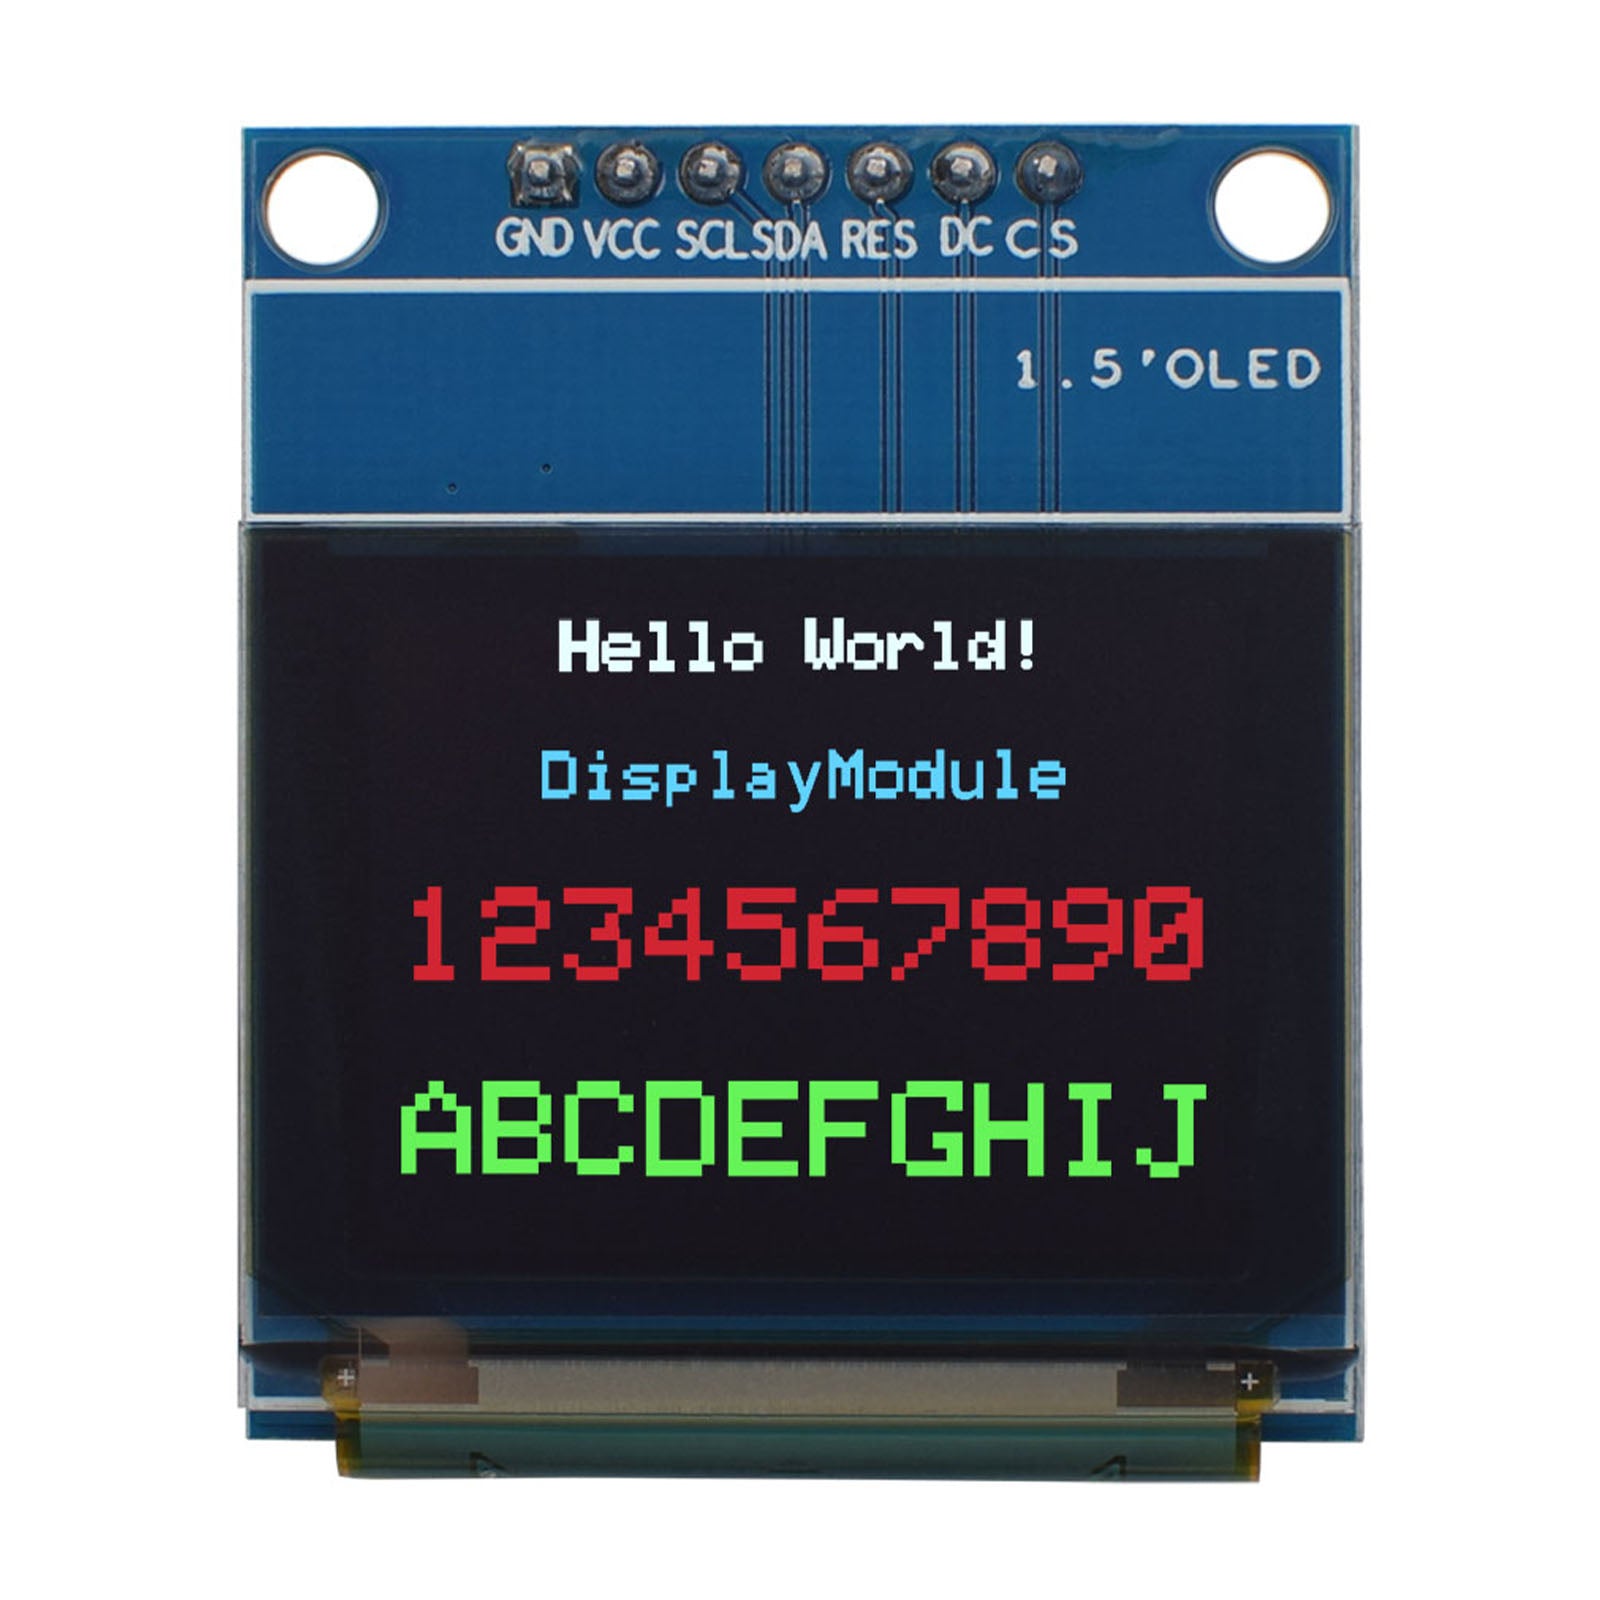 1.27-inch OLED Graphic Display Module with 128x96 resolution in RGB color, supporting SPI and MCU interfaces